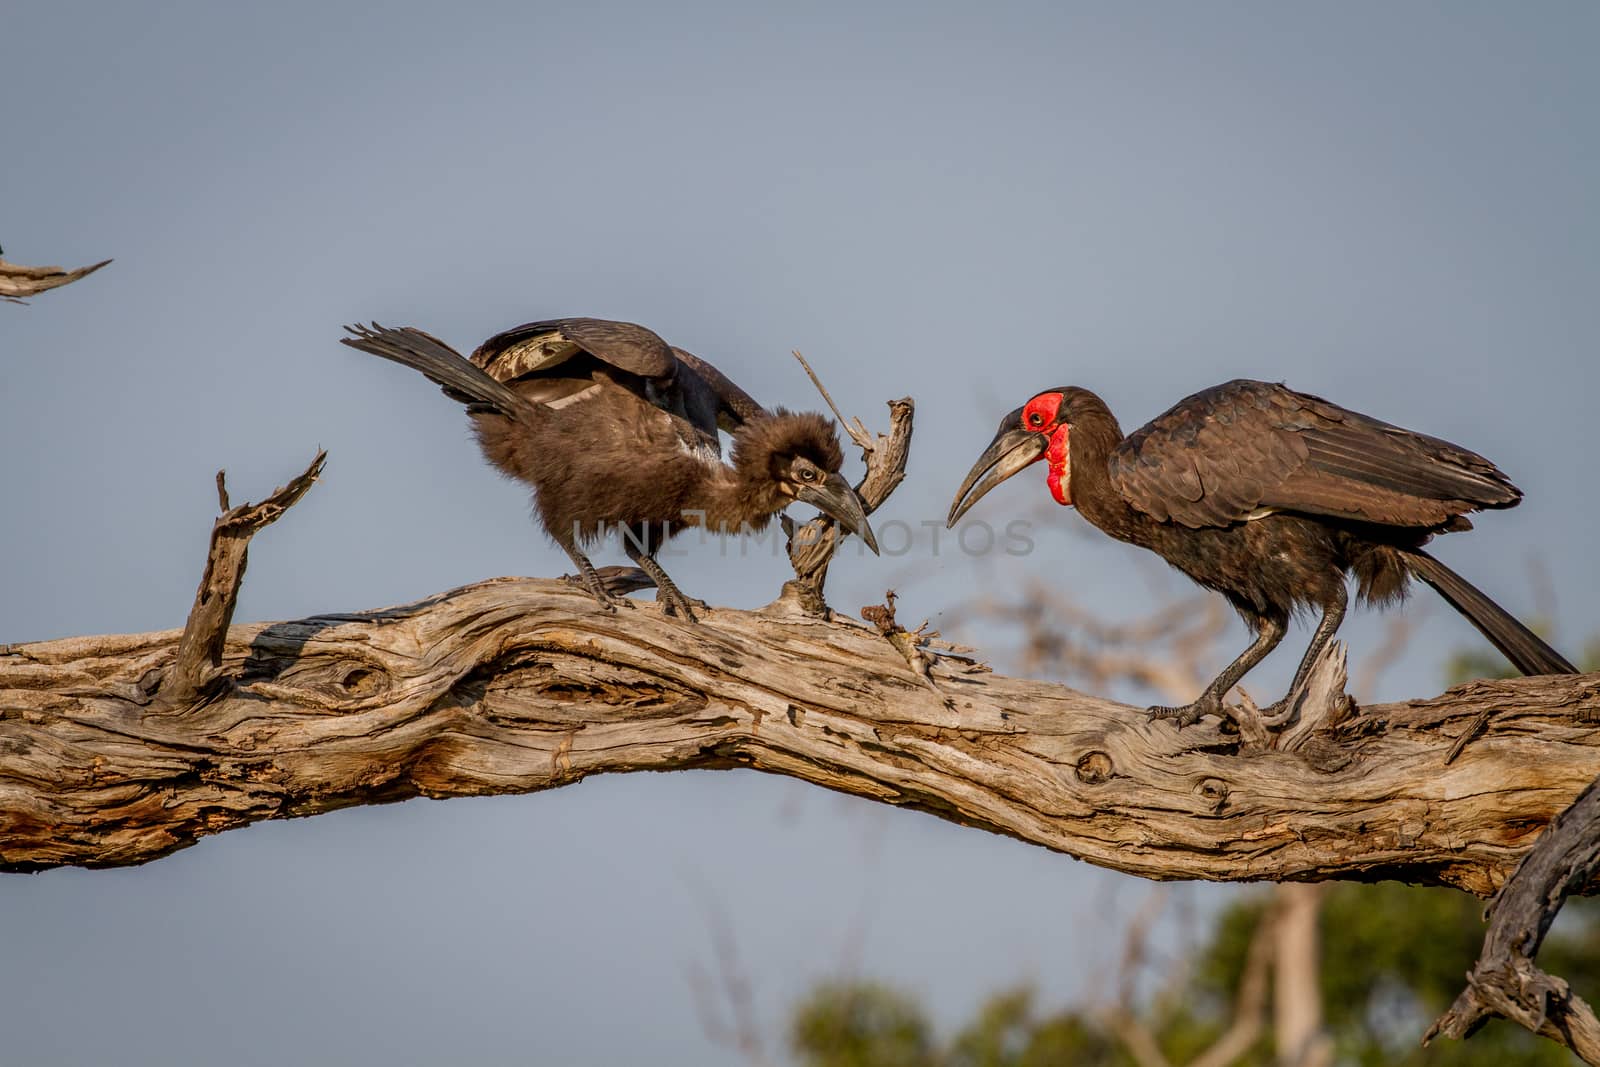 Southern ground hornbill feeding frog to juvenile. by Simoneemanphotography